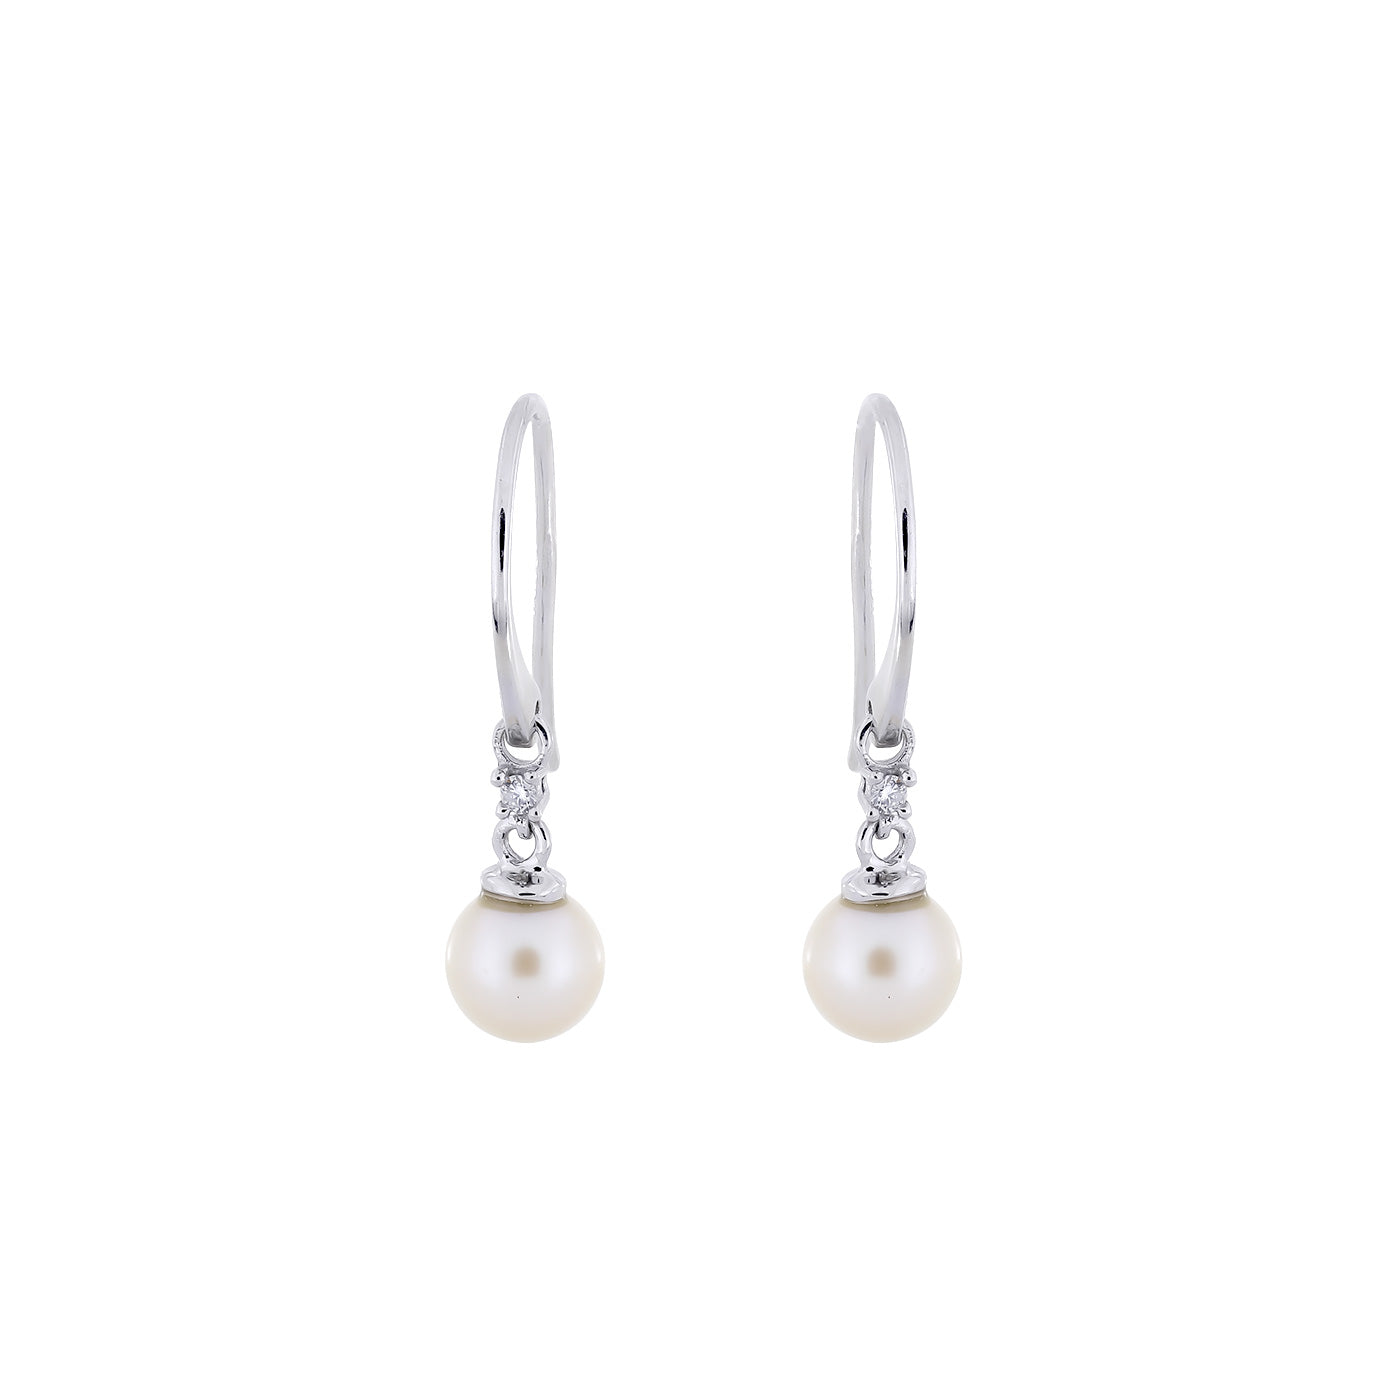 9ct White Gold, Pearl and Diamond Drop Earrings